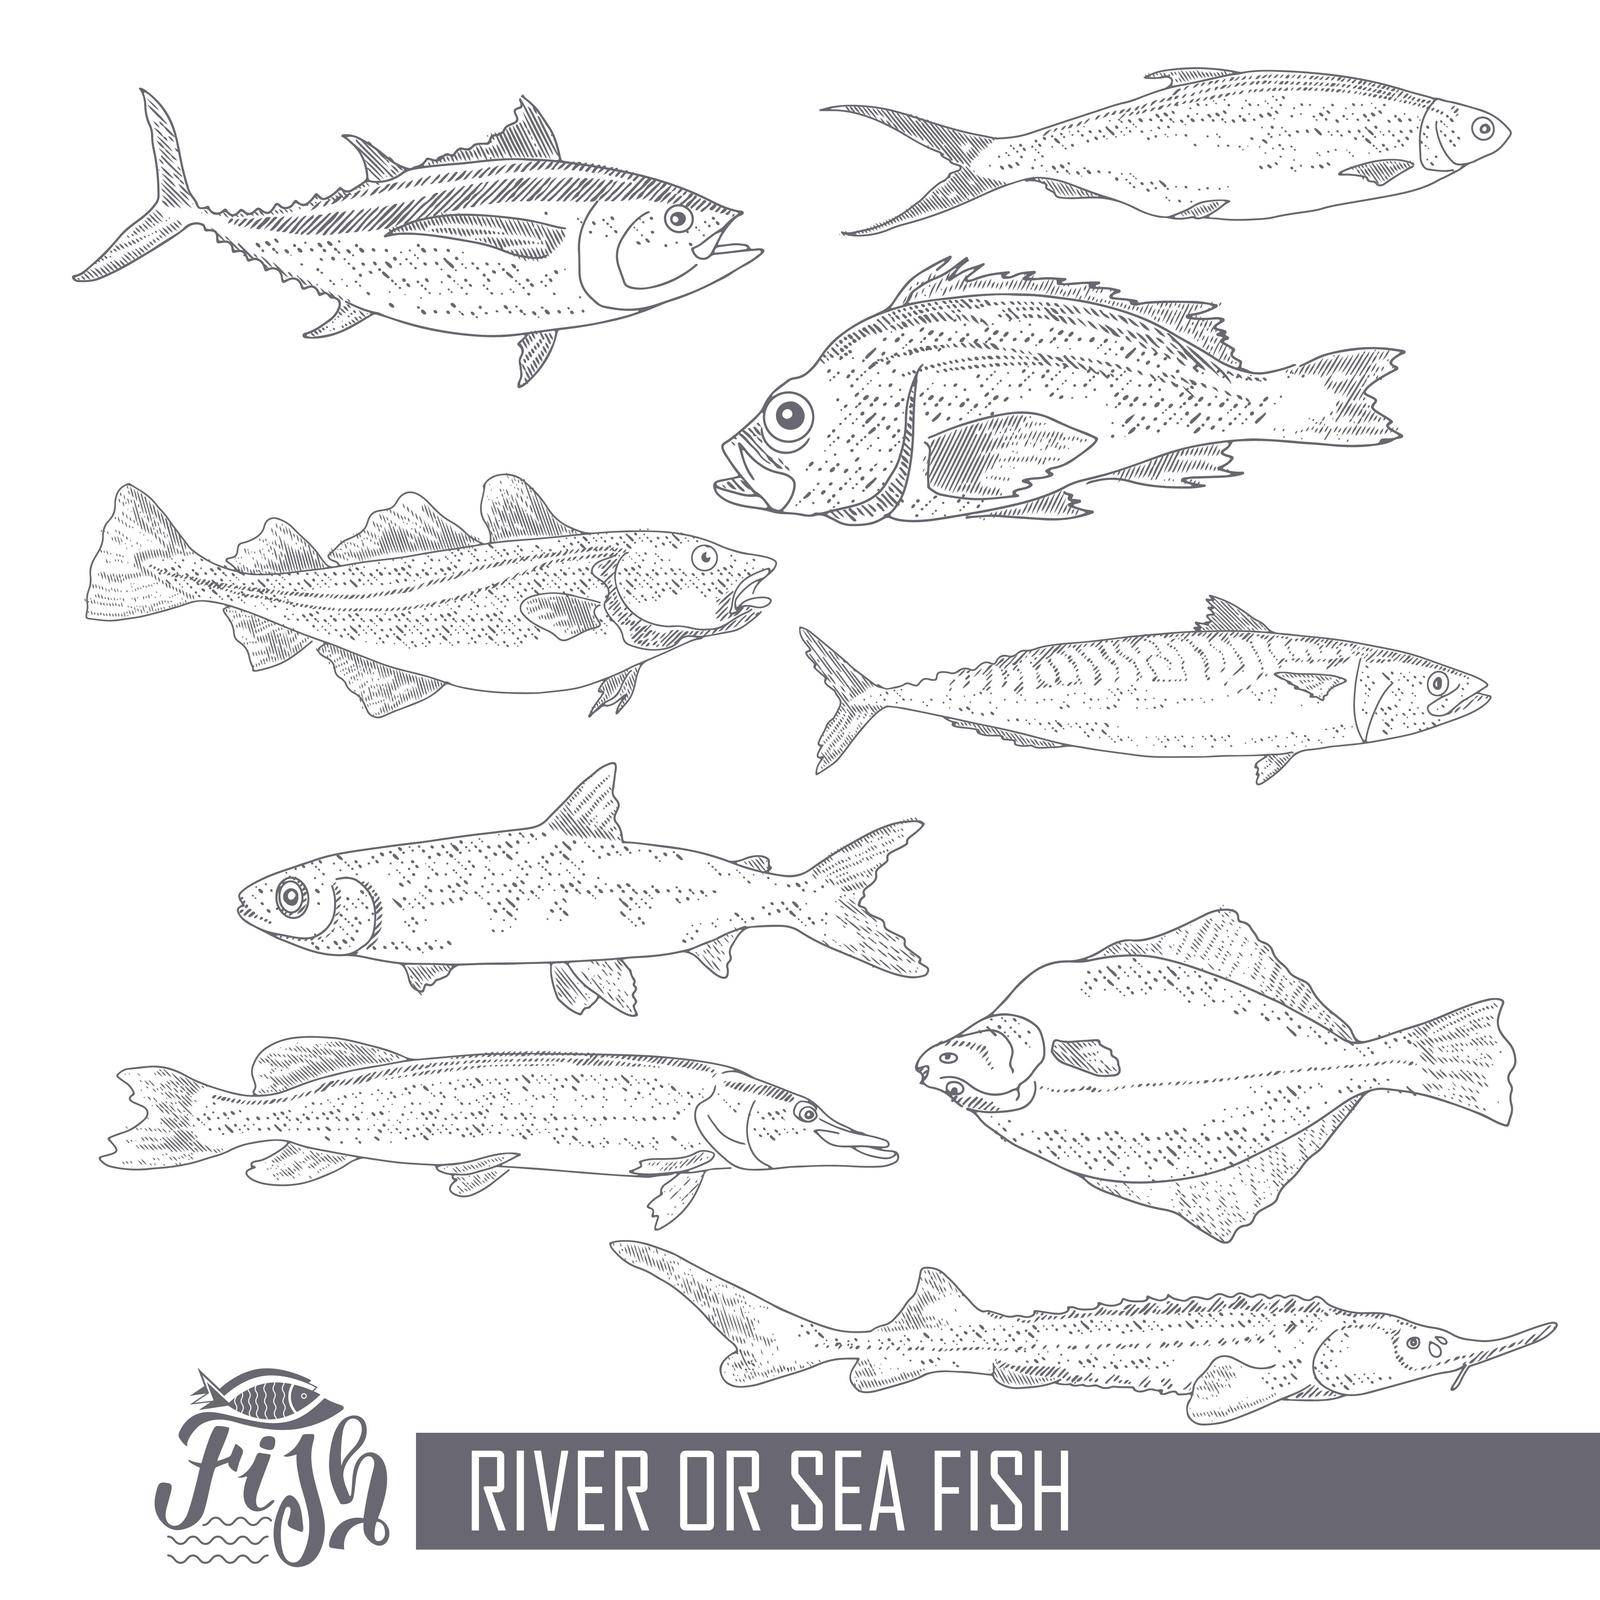 A collection of fish in vintage style by GALA_art